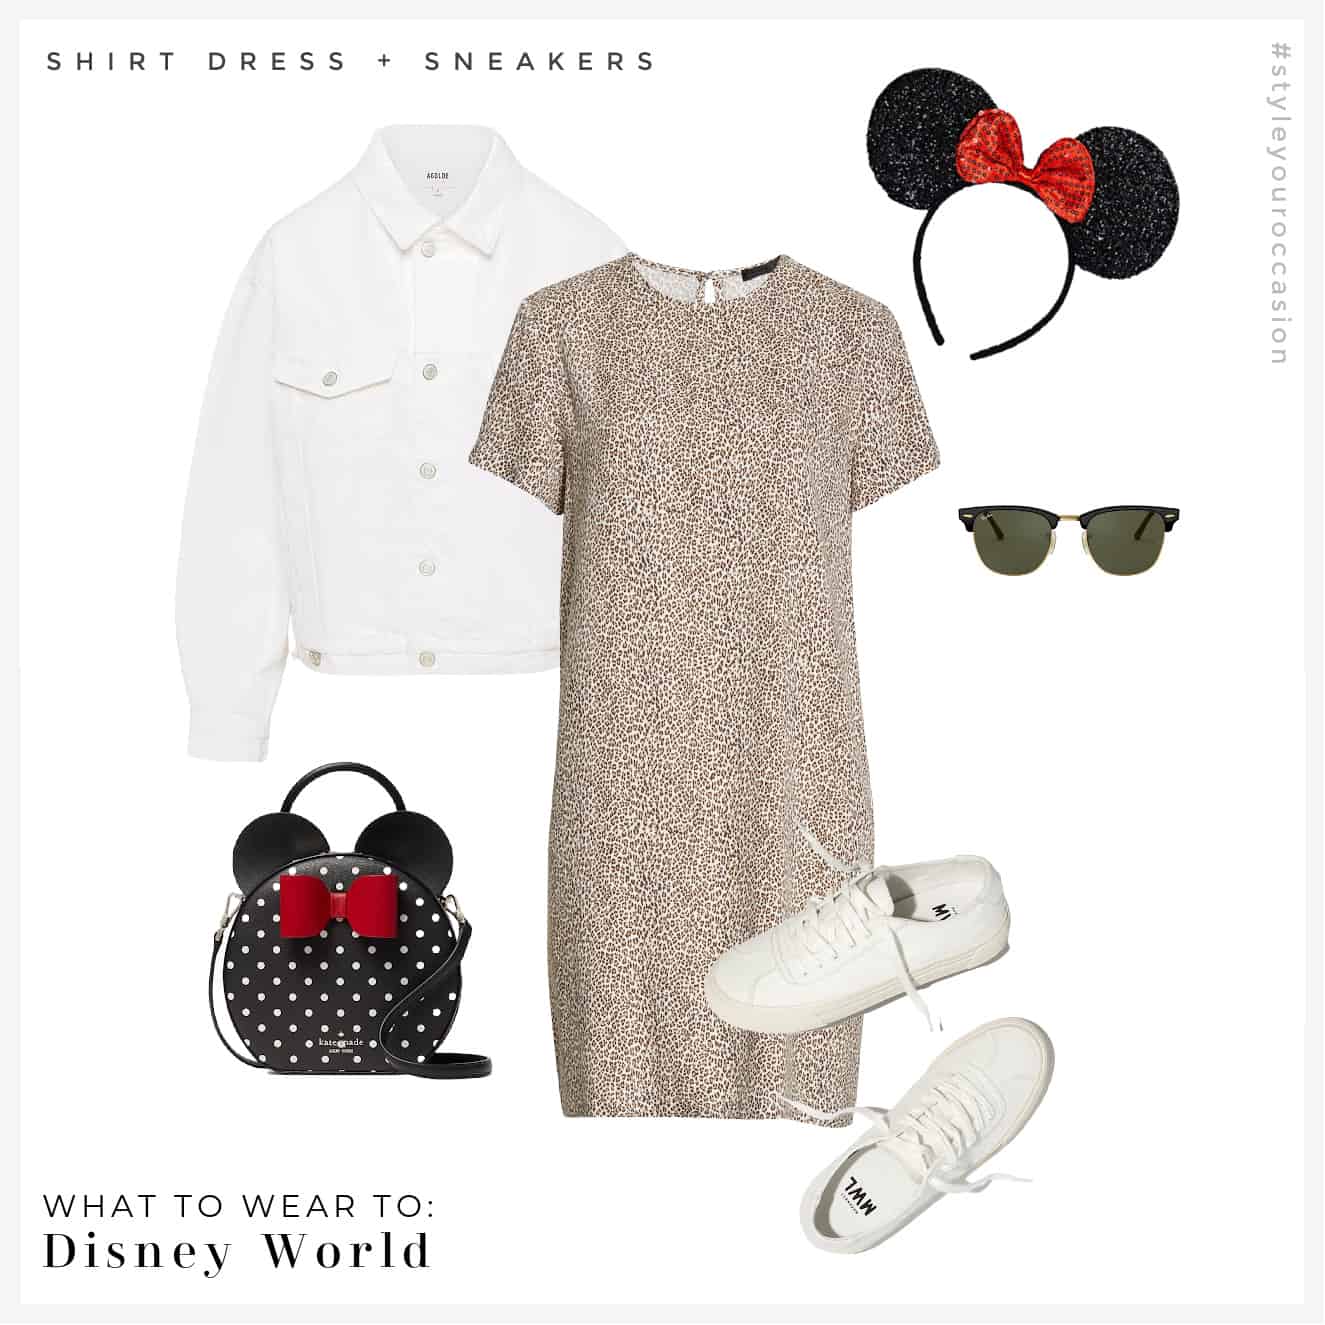 image of an outfit for Disney World with a t-shirt dress, white denim jacket, canvas sneakers, a black Kate Spade Minnie purse, Minnie Mouse ears and sunglasses